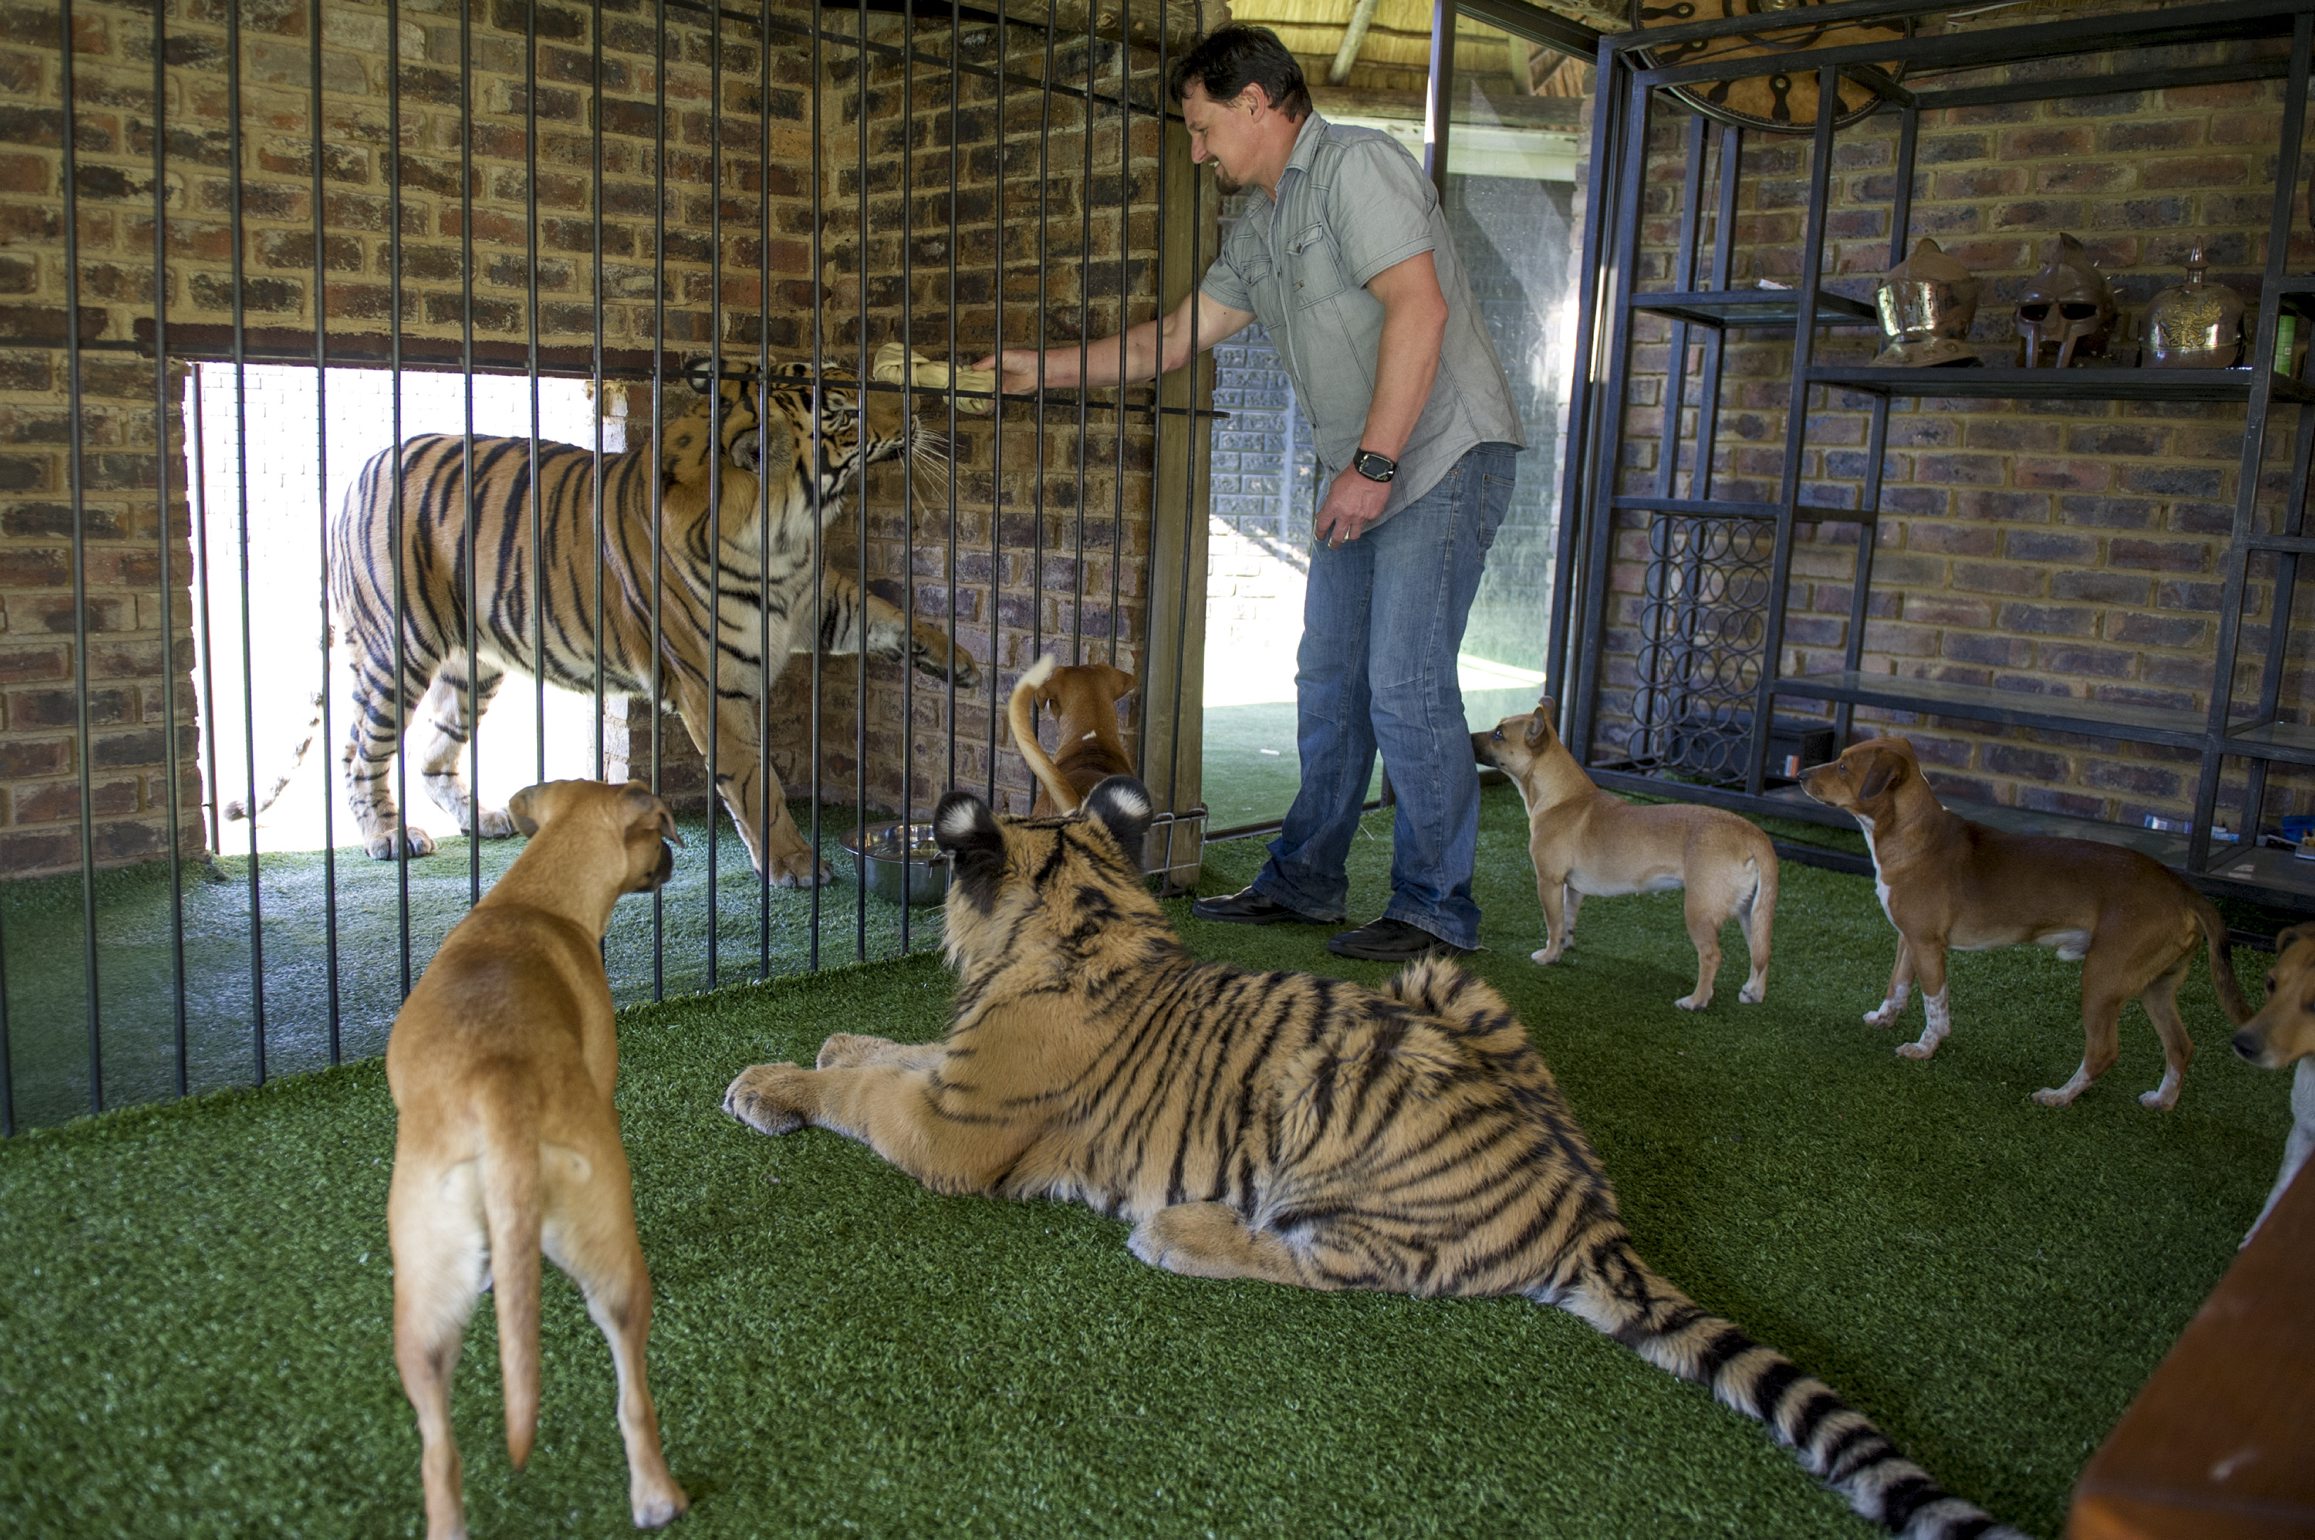 Michael Jamison with his two tigers and some of his hounds on May 31, 2013, in Brakpan, South Africa. Jamison adopted Ozzy, in addition to his 15 dogs and 2-year-old Bengal tiger. Ozzy has deformed legs and feet as a result of malnutrition from his previous owners. Image: Gallo Images / Foto24 / Christian Kotze